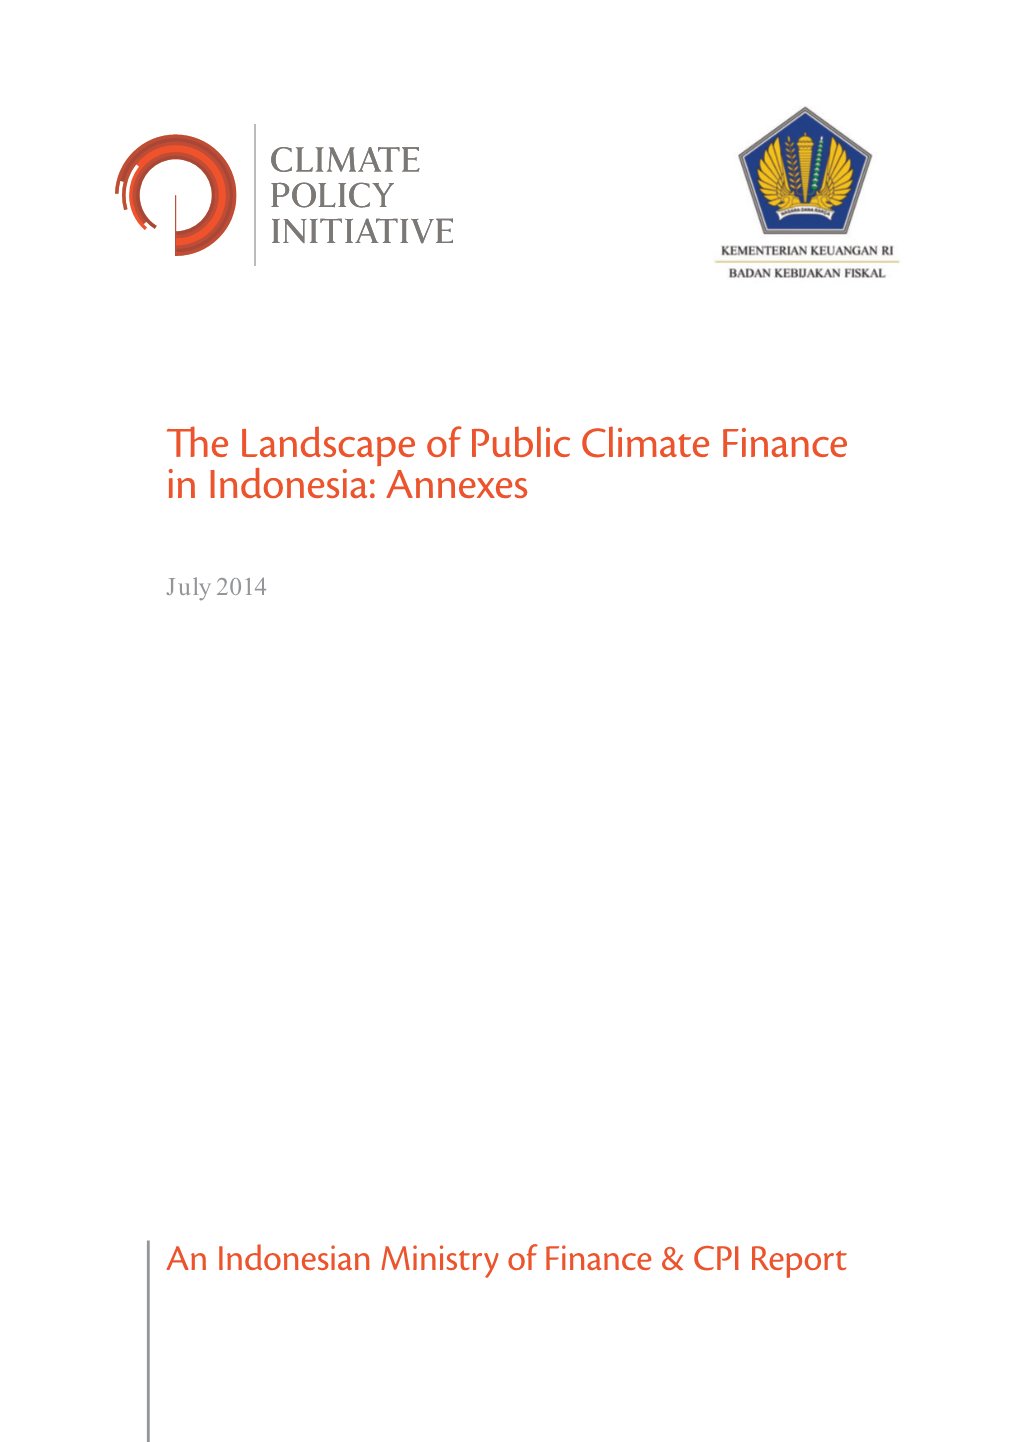 The Landscape of Public Climate Finance in Indonesia: Annexes